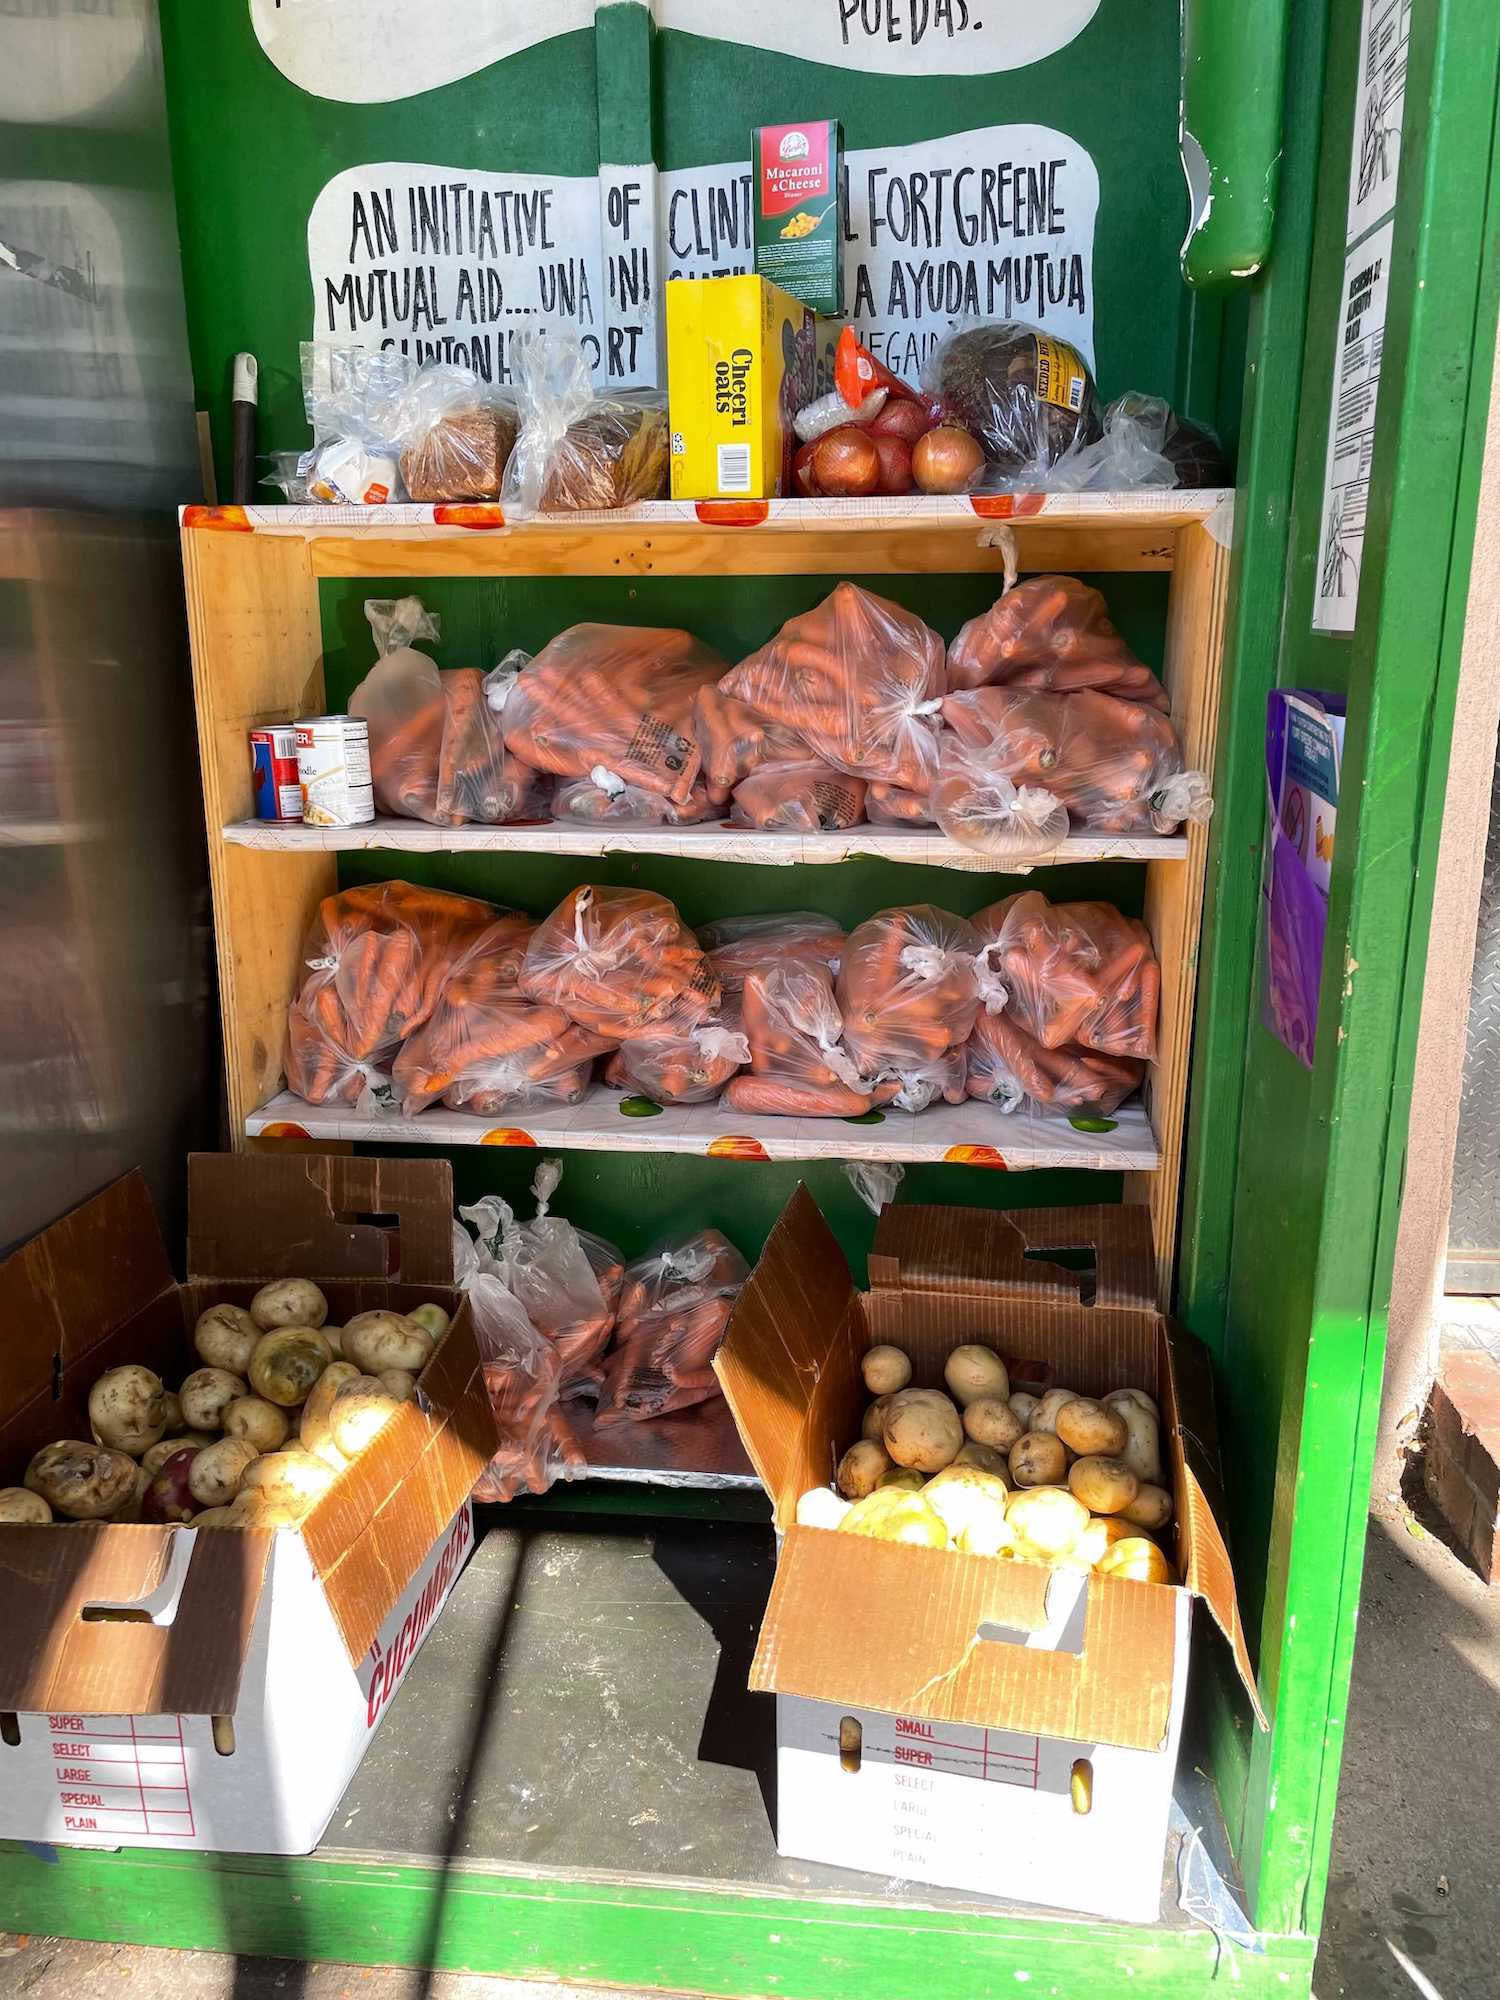 Fort Greene community fridge stocked with potatoes and carrots. October 2021